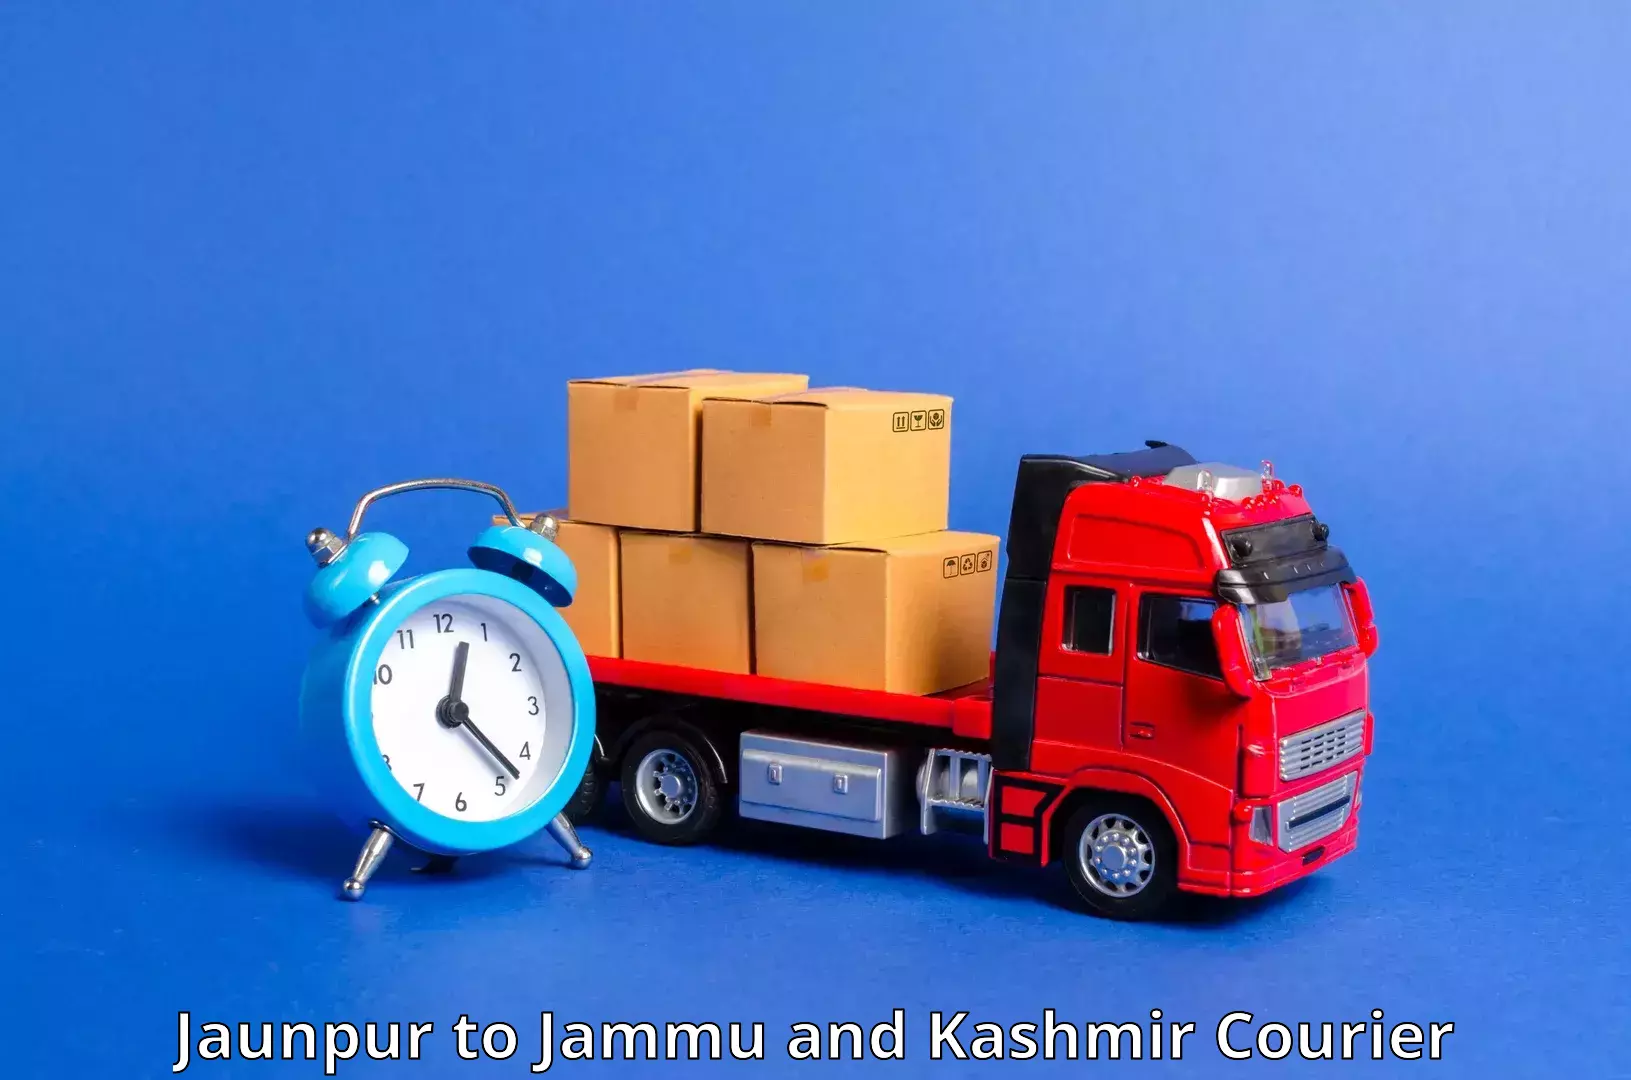 Weekend courier service in Jaunpur to Jammu and Kashmir